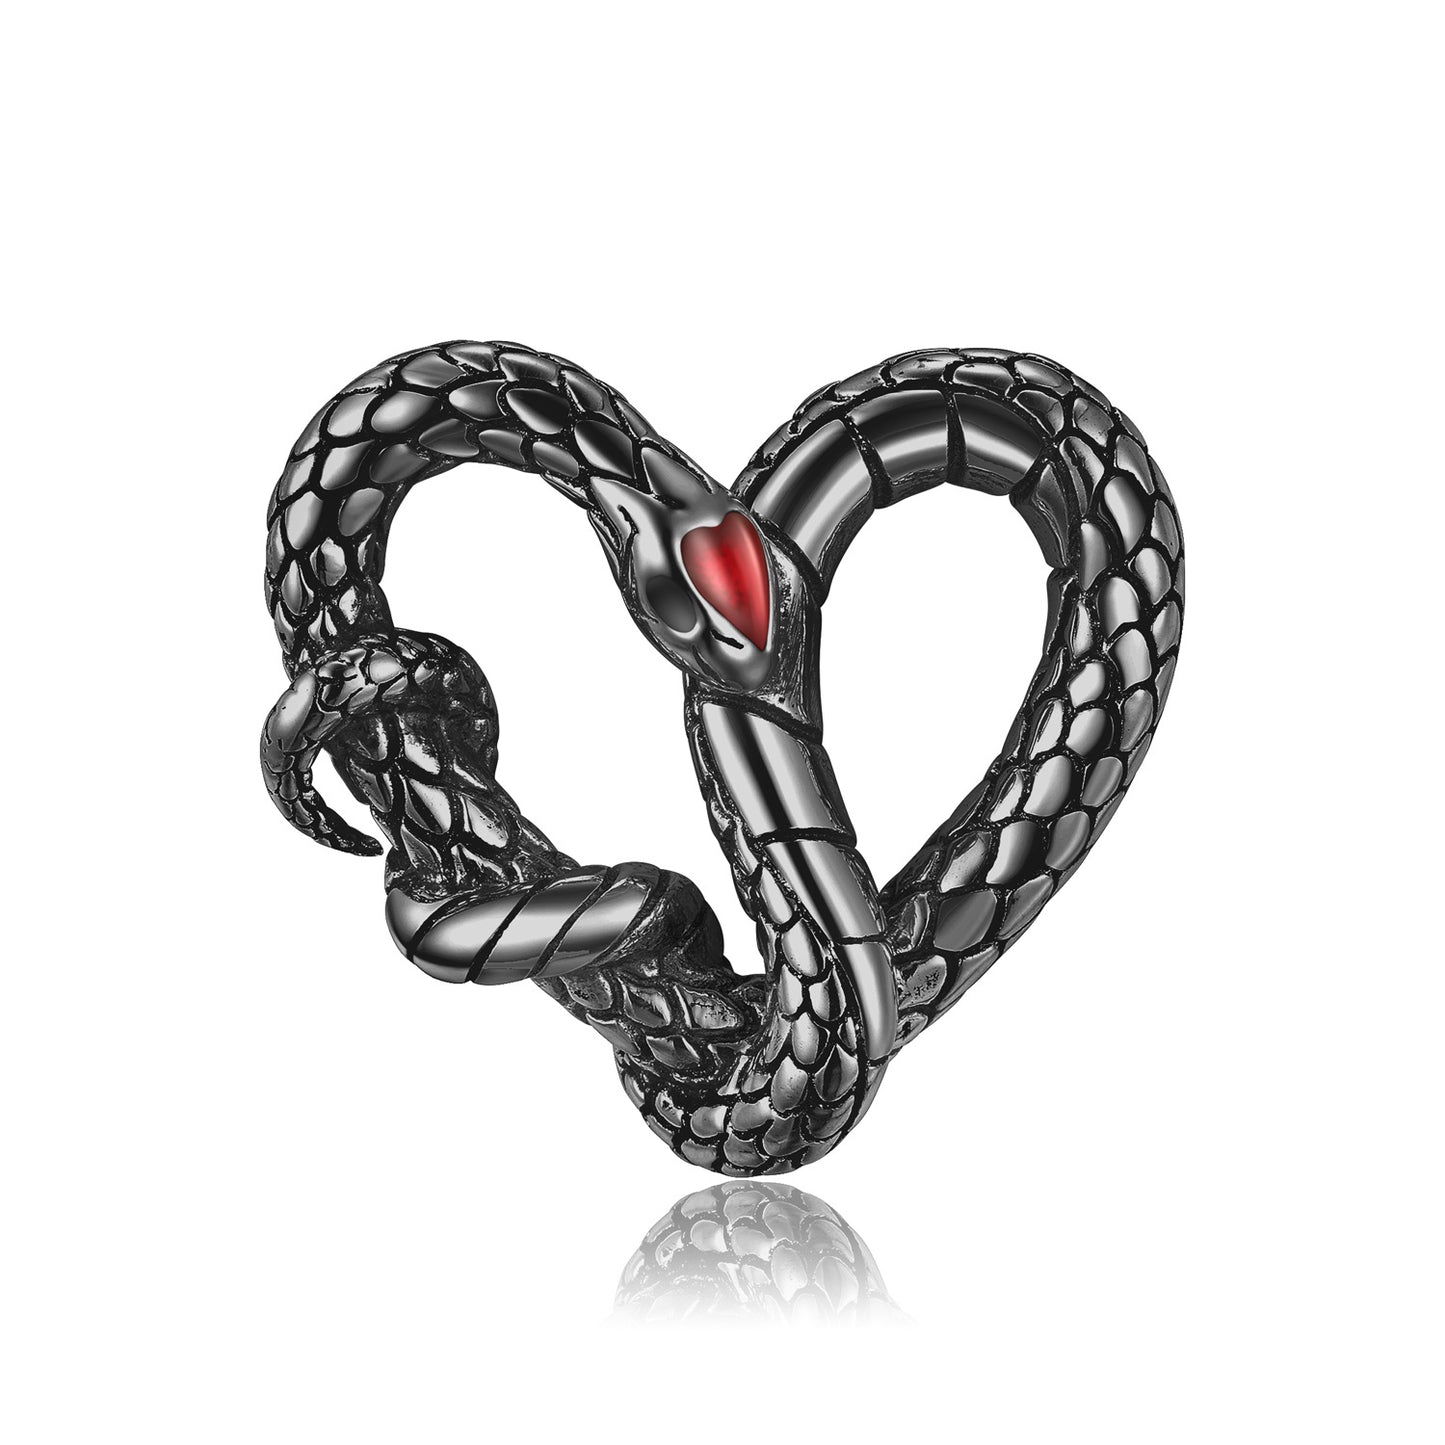 Uniquent Fashion Heart Snakeaasteela Necklace